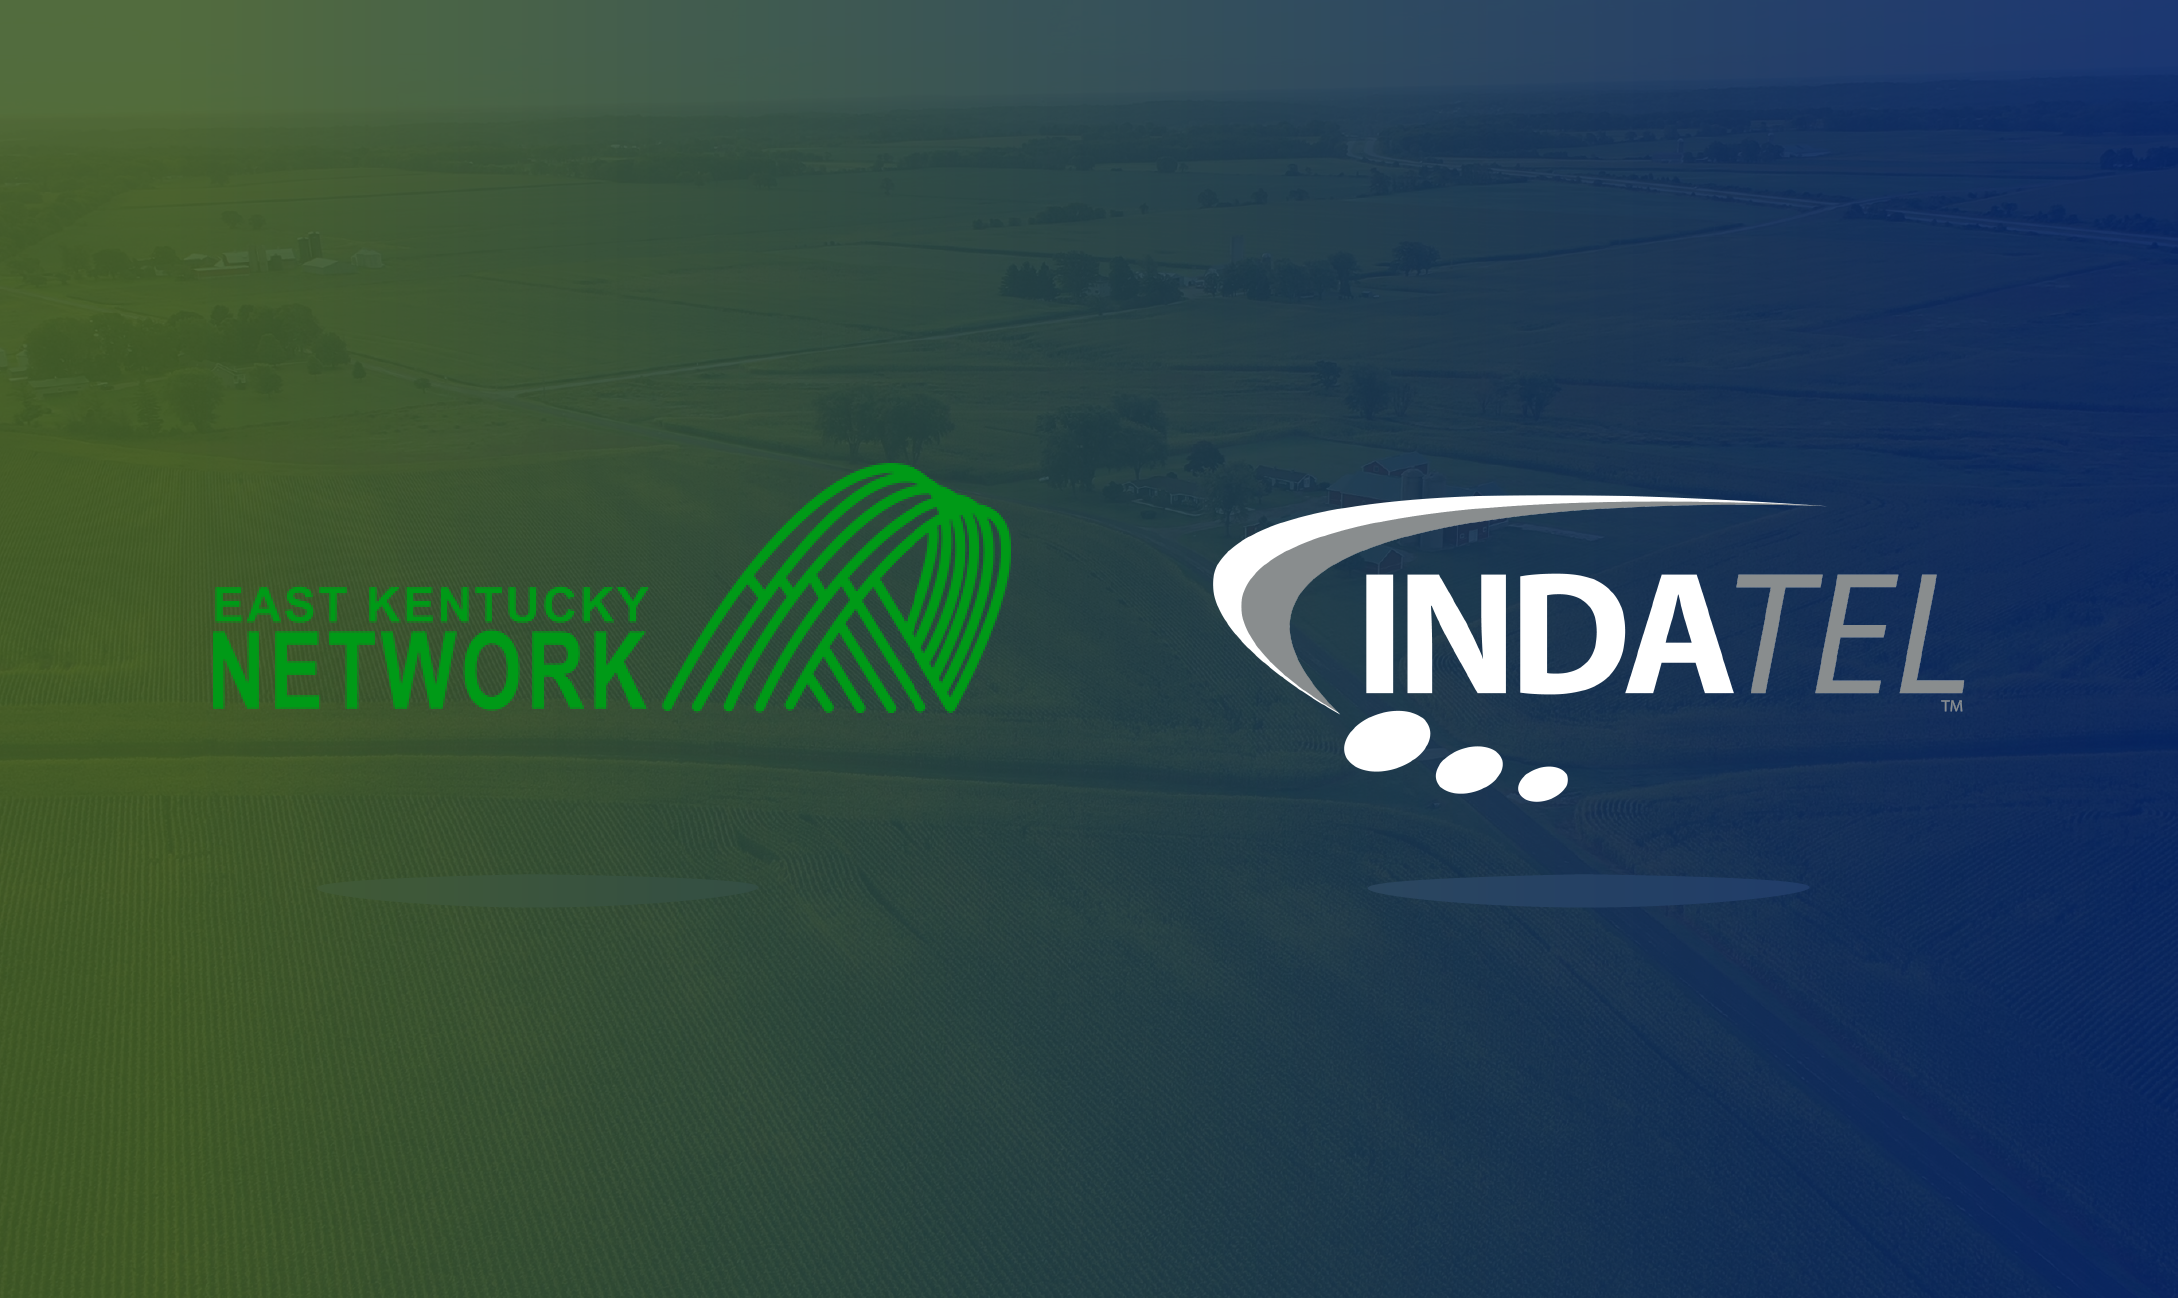 INDATEL Welcomes East Kentucky Network as New Member image